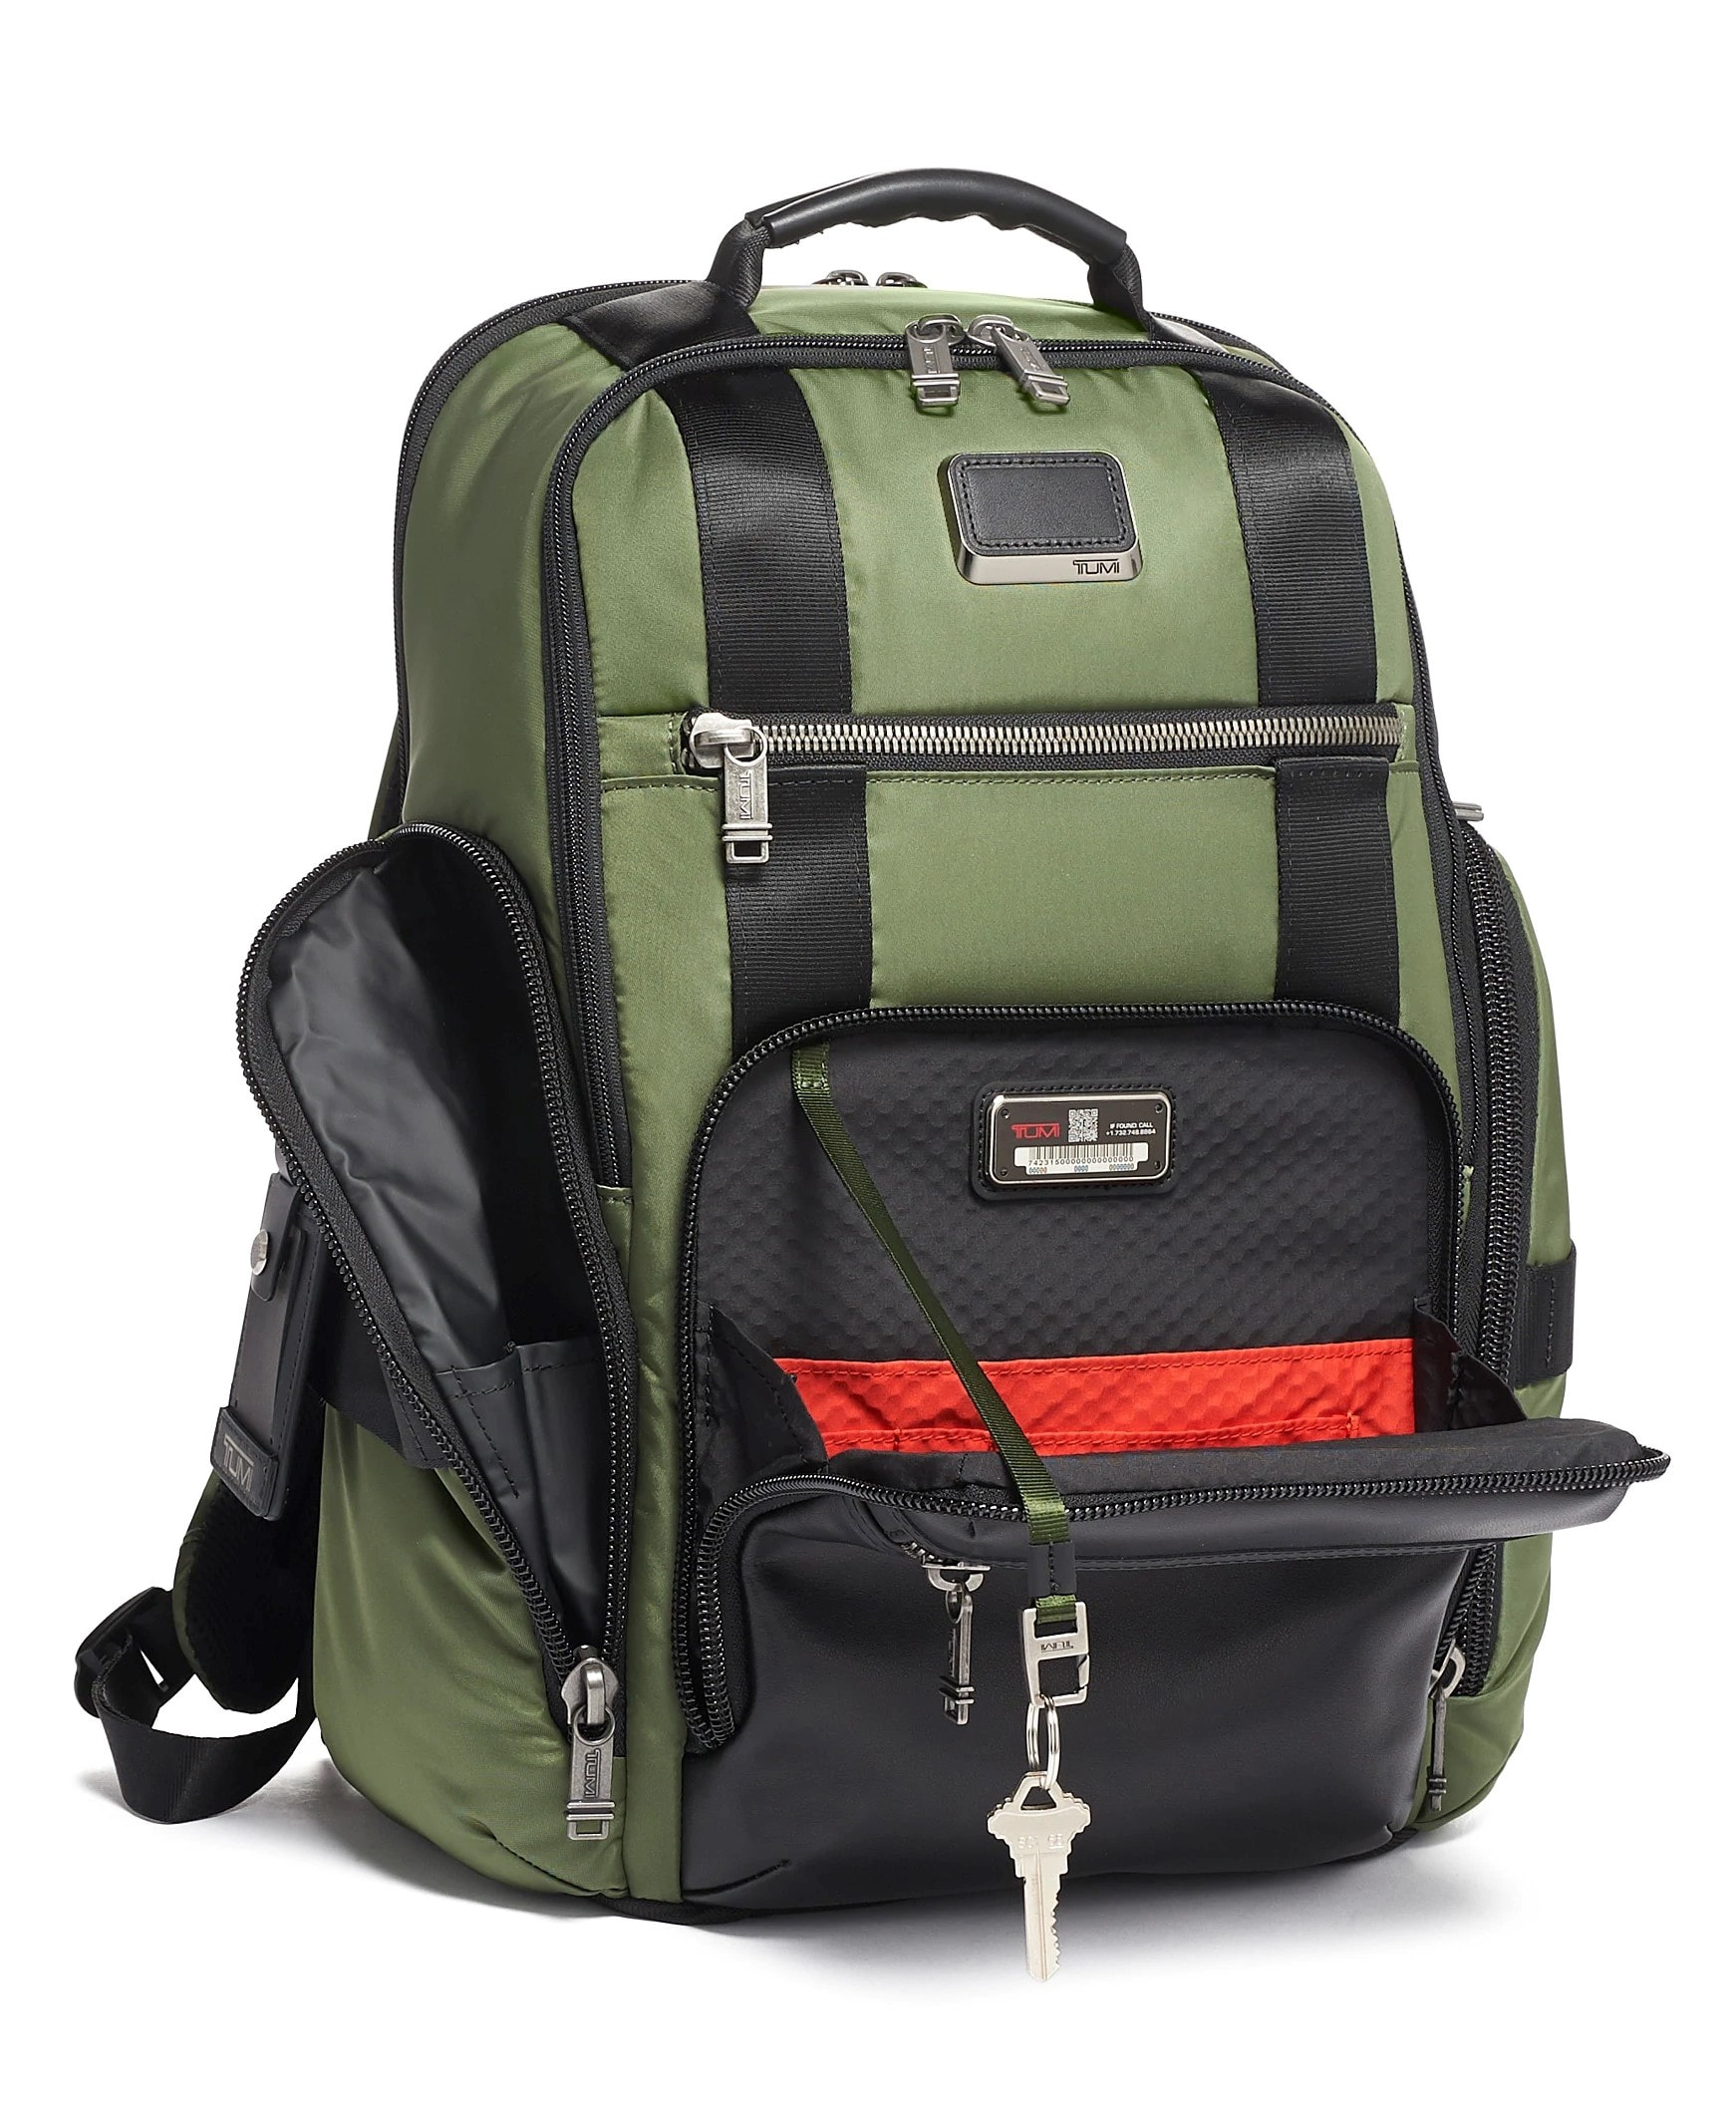 BALO TUMI SHEPPARD DELUXE BRIEF PACK ALPHA BRAVO BACKPACK 18